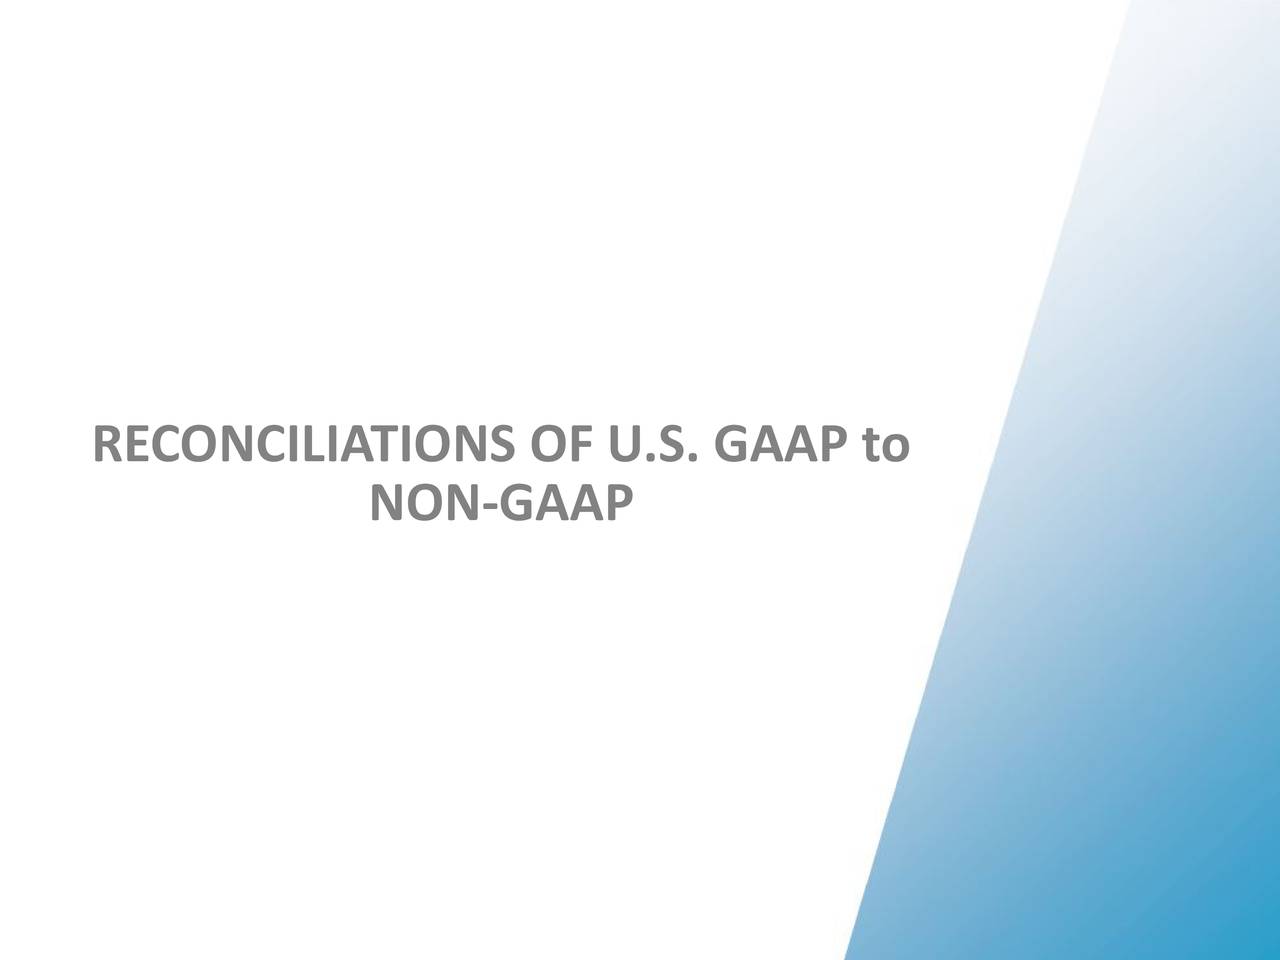 RECONCILIATIONS OF U.S. GAAP to